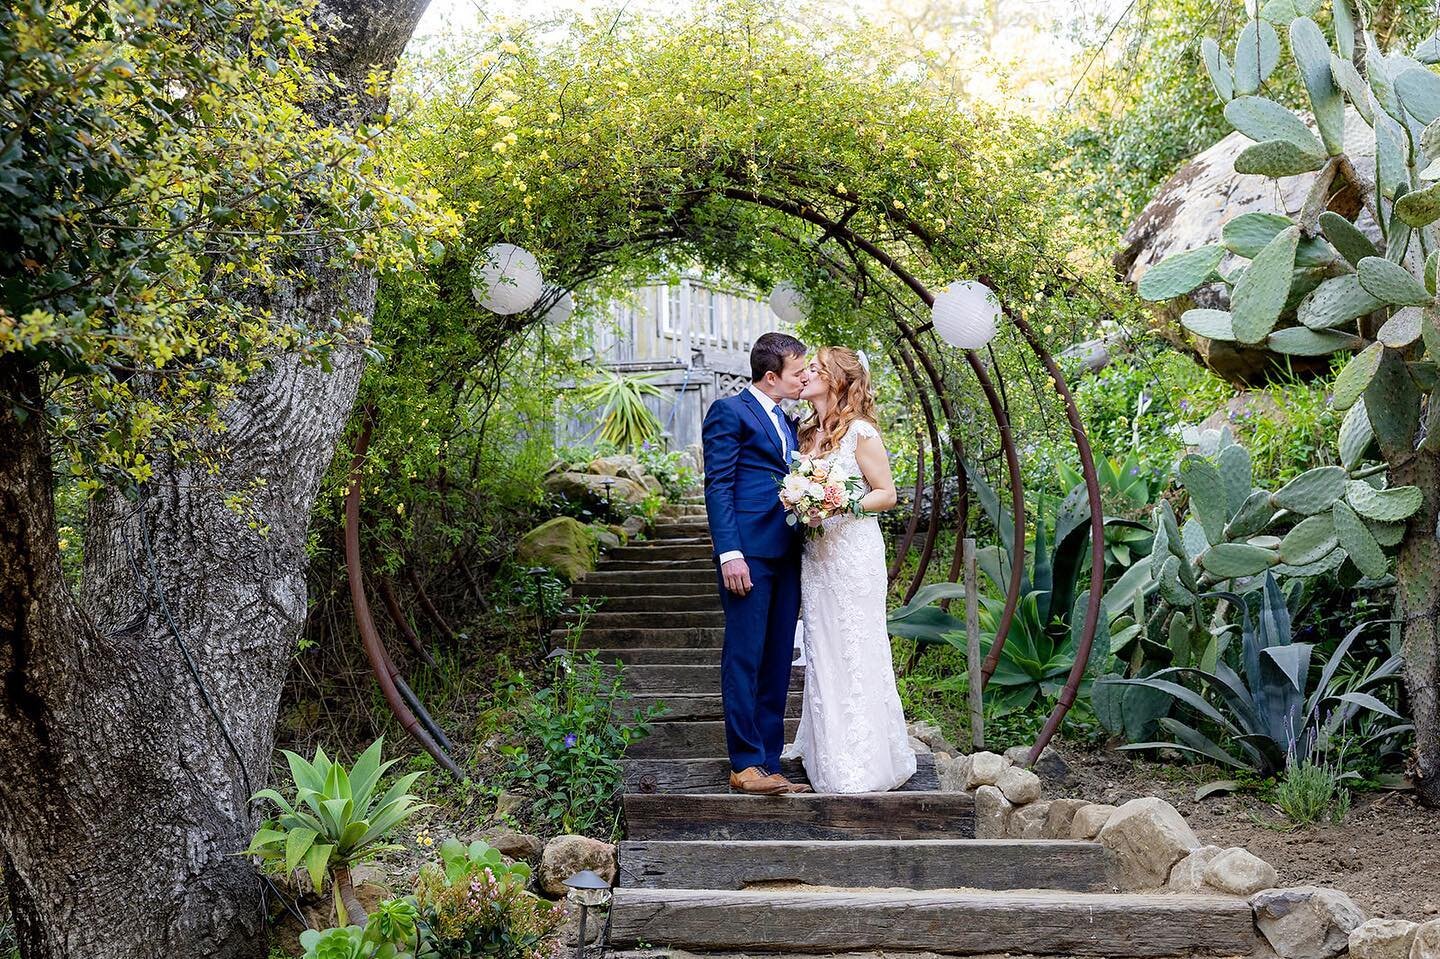 Congratulations to India and Collin! They were married in a piece of paradise nestled within the Los Padres Forest. Family and friends from around the world came together to celebrate their magical day. #love #roses #lospadresnationalforest #santabar